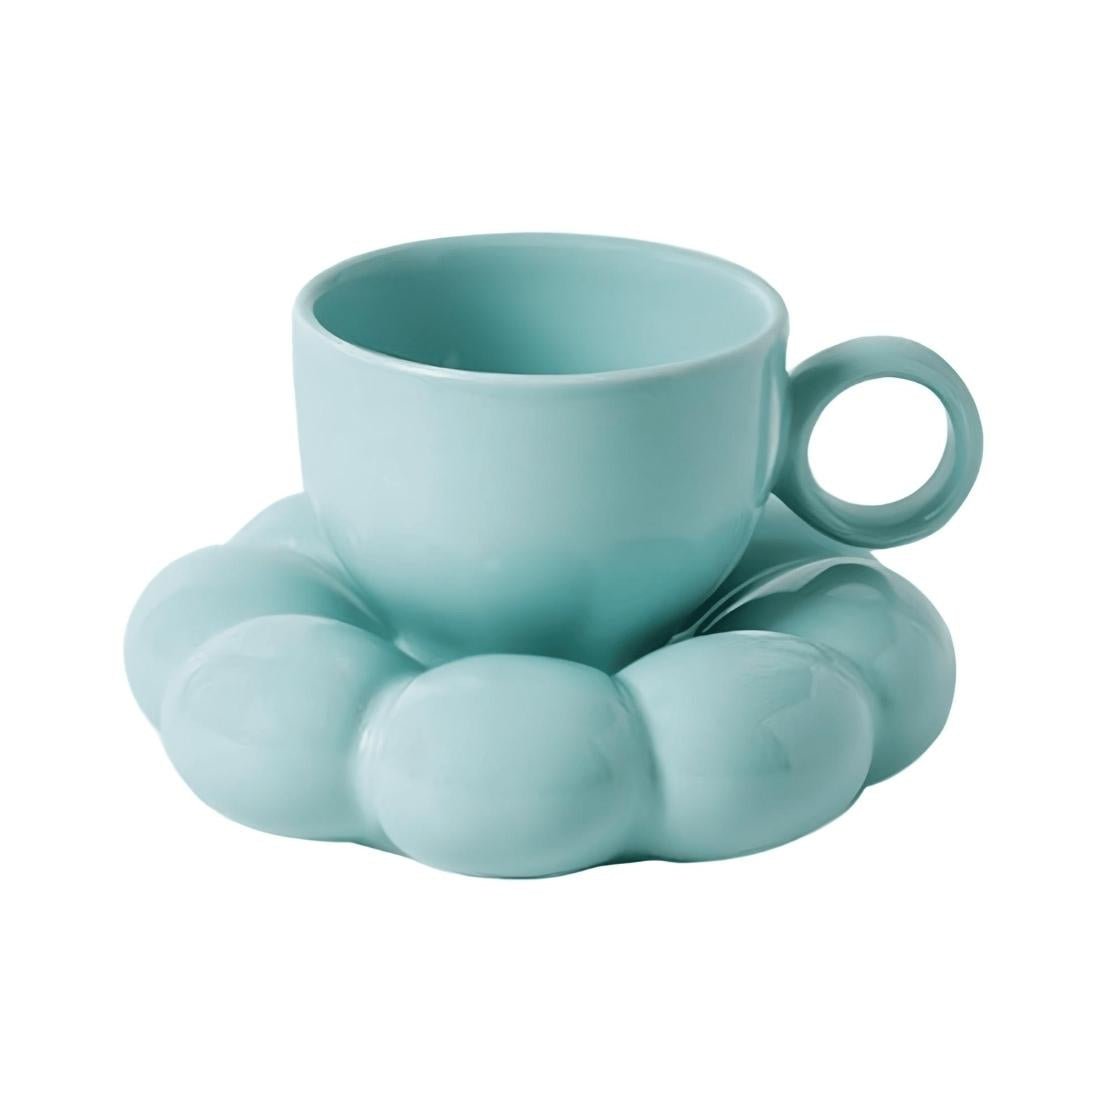 Blue tea cup with flower saucer